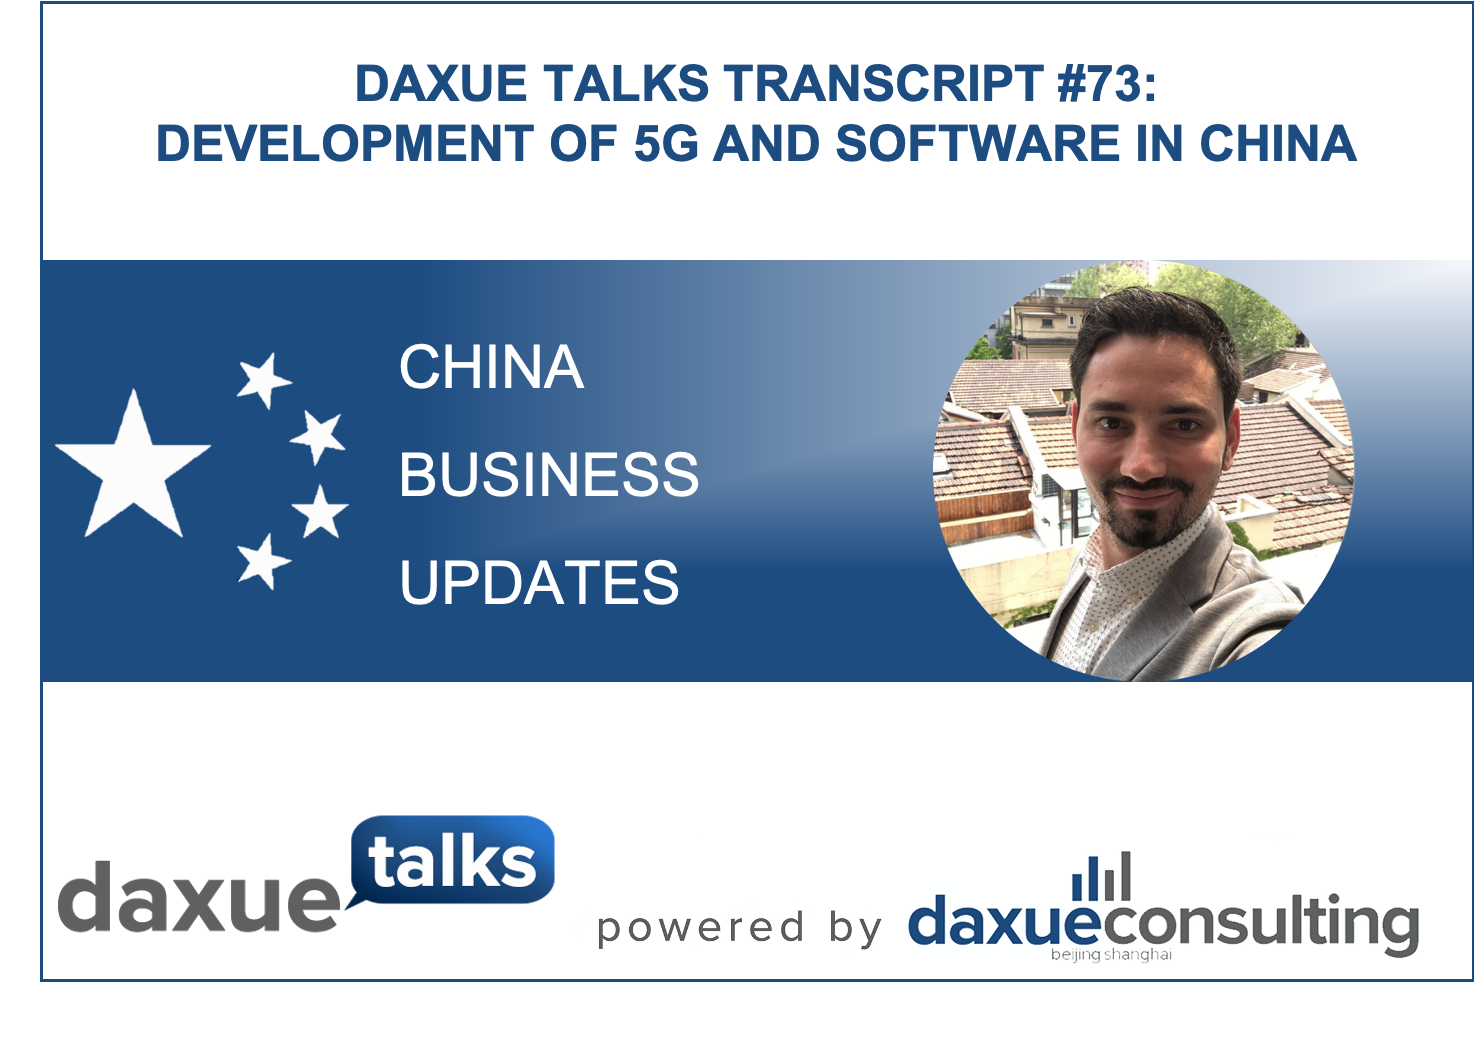 Daxue Talks transcript #73: Development of 5G and software in China